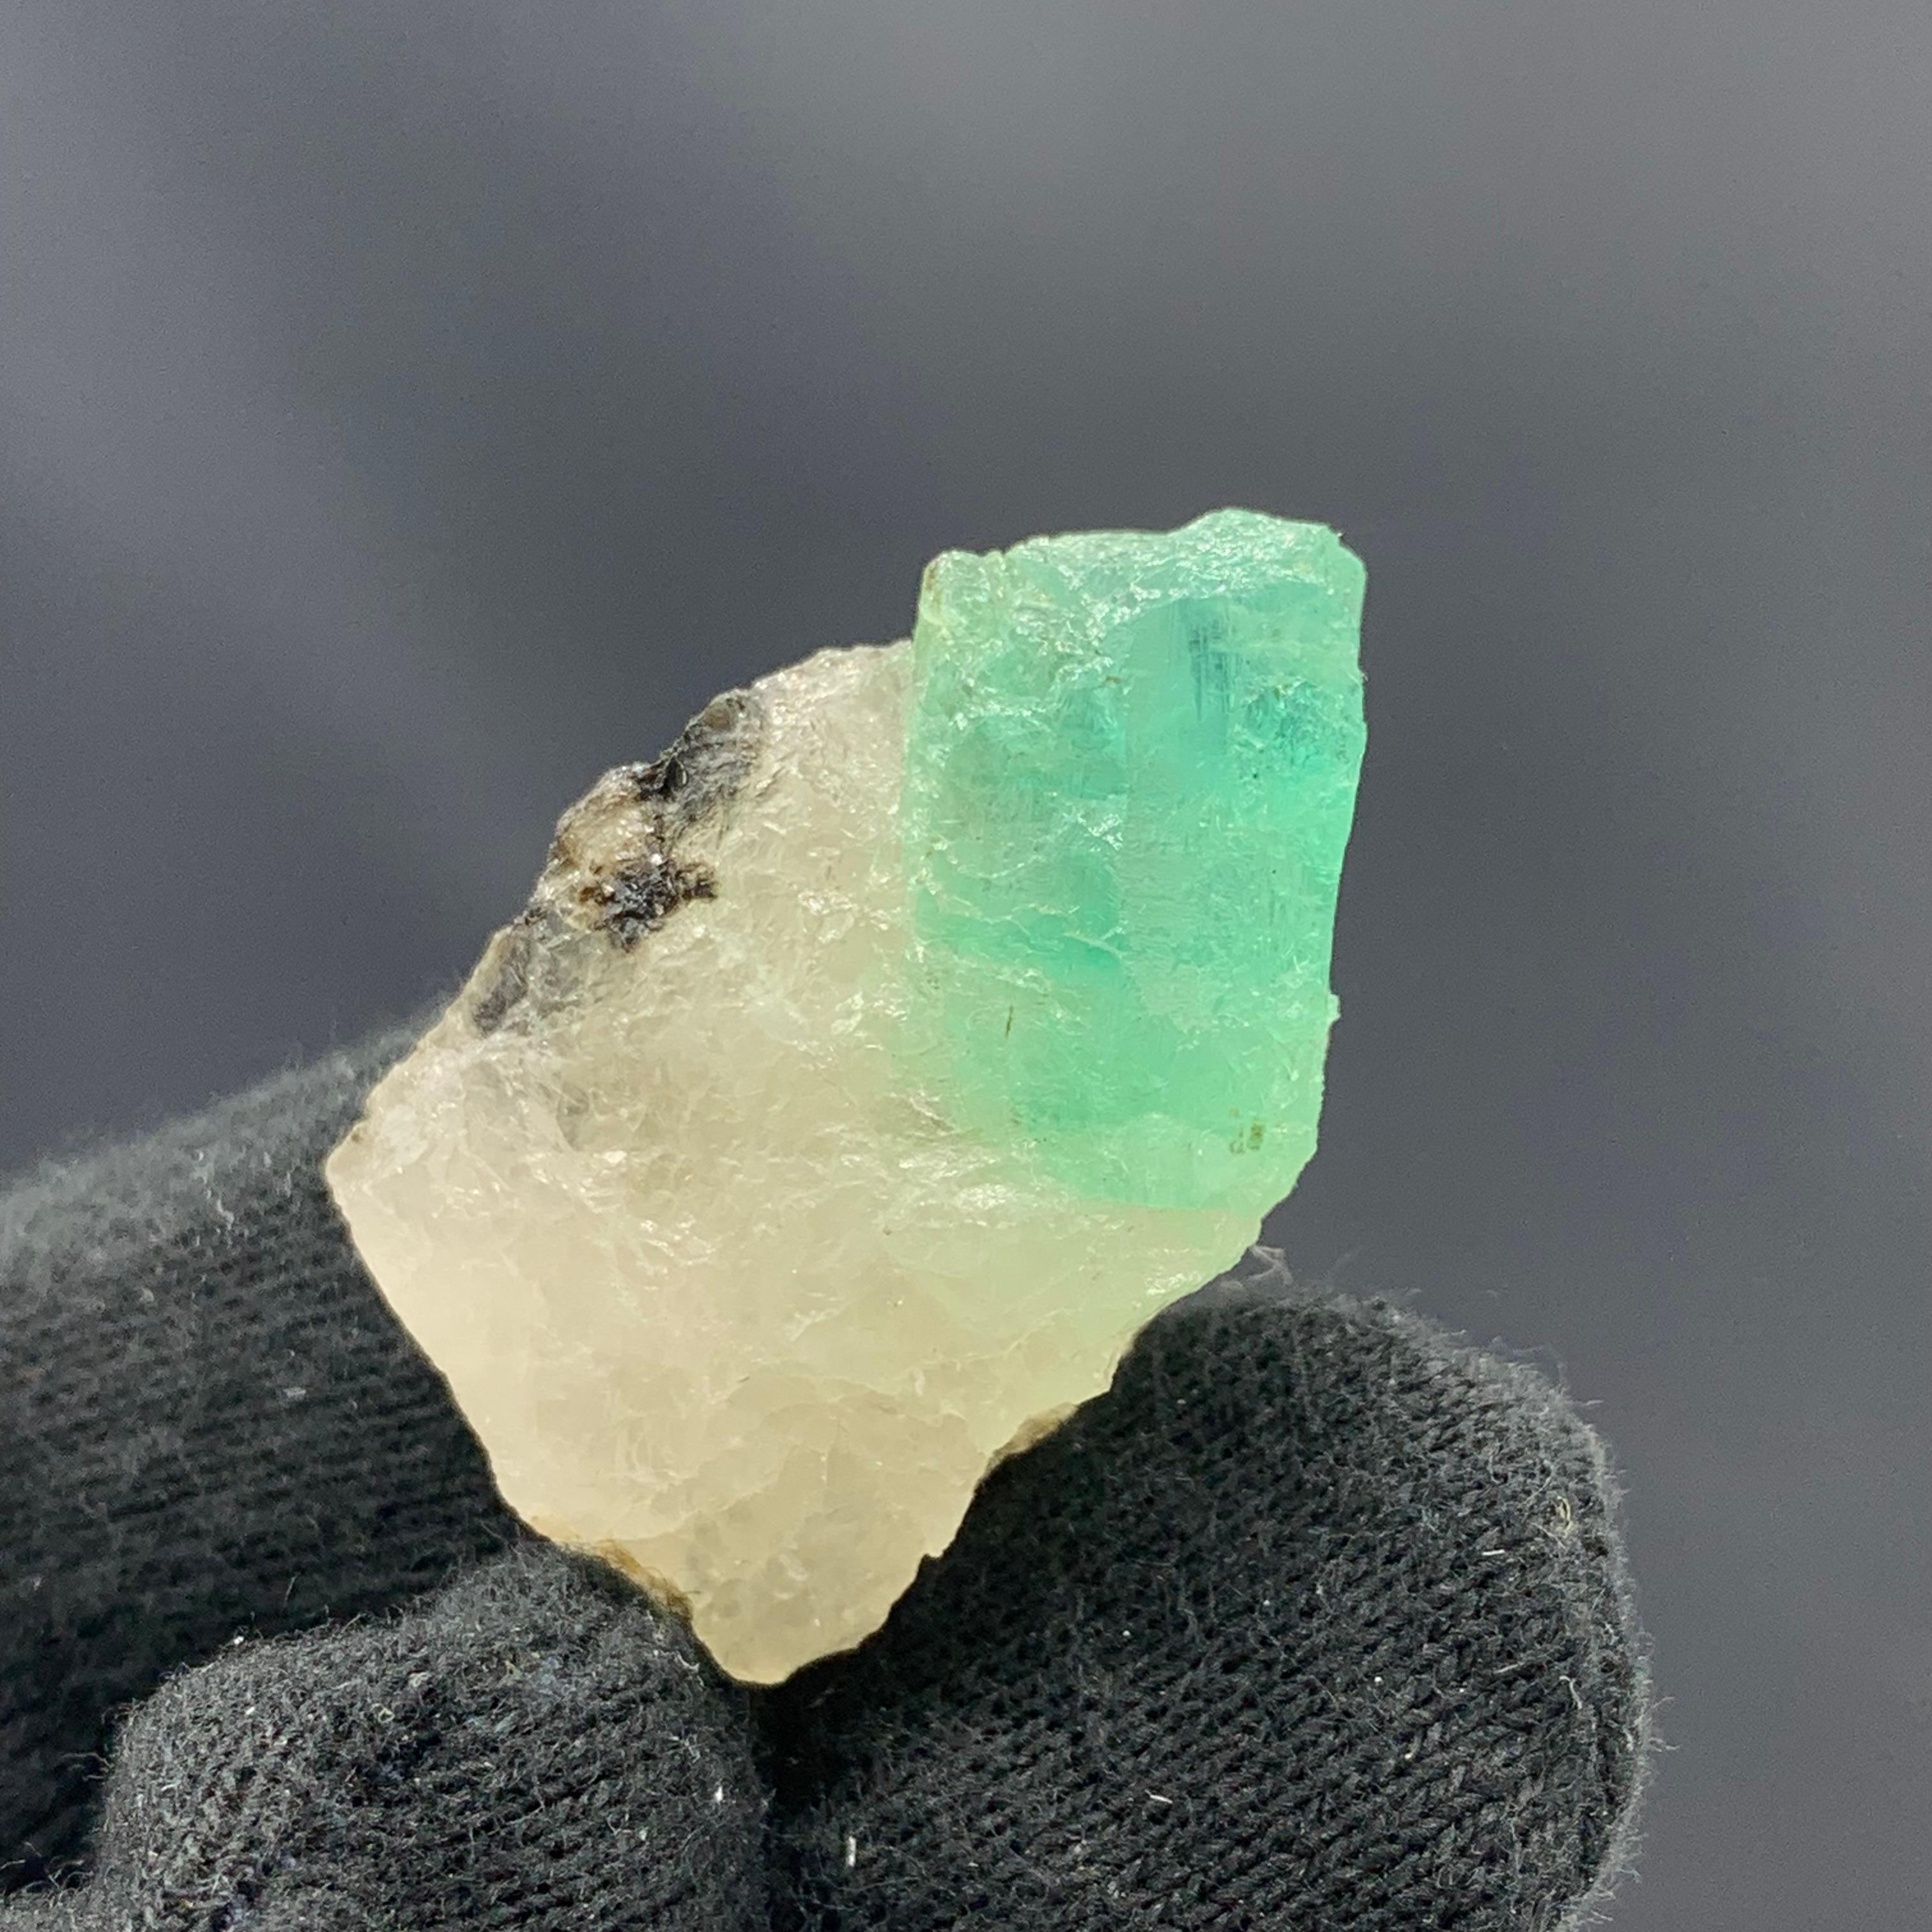 15.50 Gram Gorgeous Emerald Specimen From Swat Valley, Pakistan 

Weight: 15.50 Gram
Dimension: 3.1 x 2.8 x 2.1 Cm
Origin: Swat Valley, Pakistan 

Emerald has the chemical composition Be3Al2(SiO3)6 and is classified as a cyclosilicate. It has a